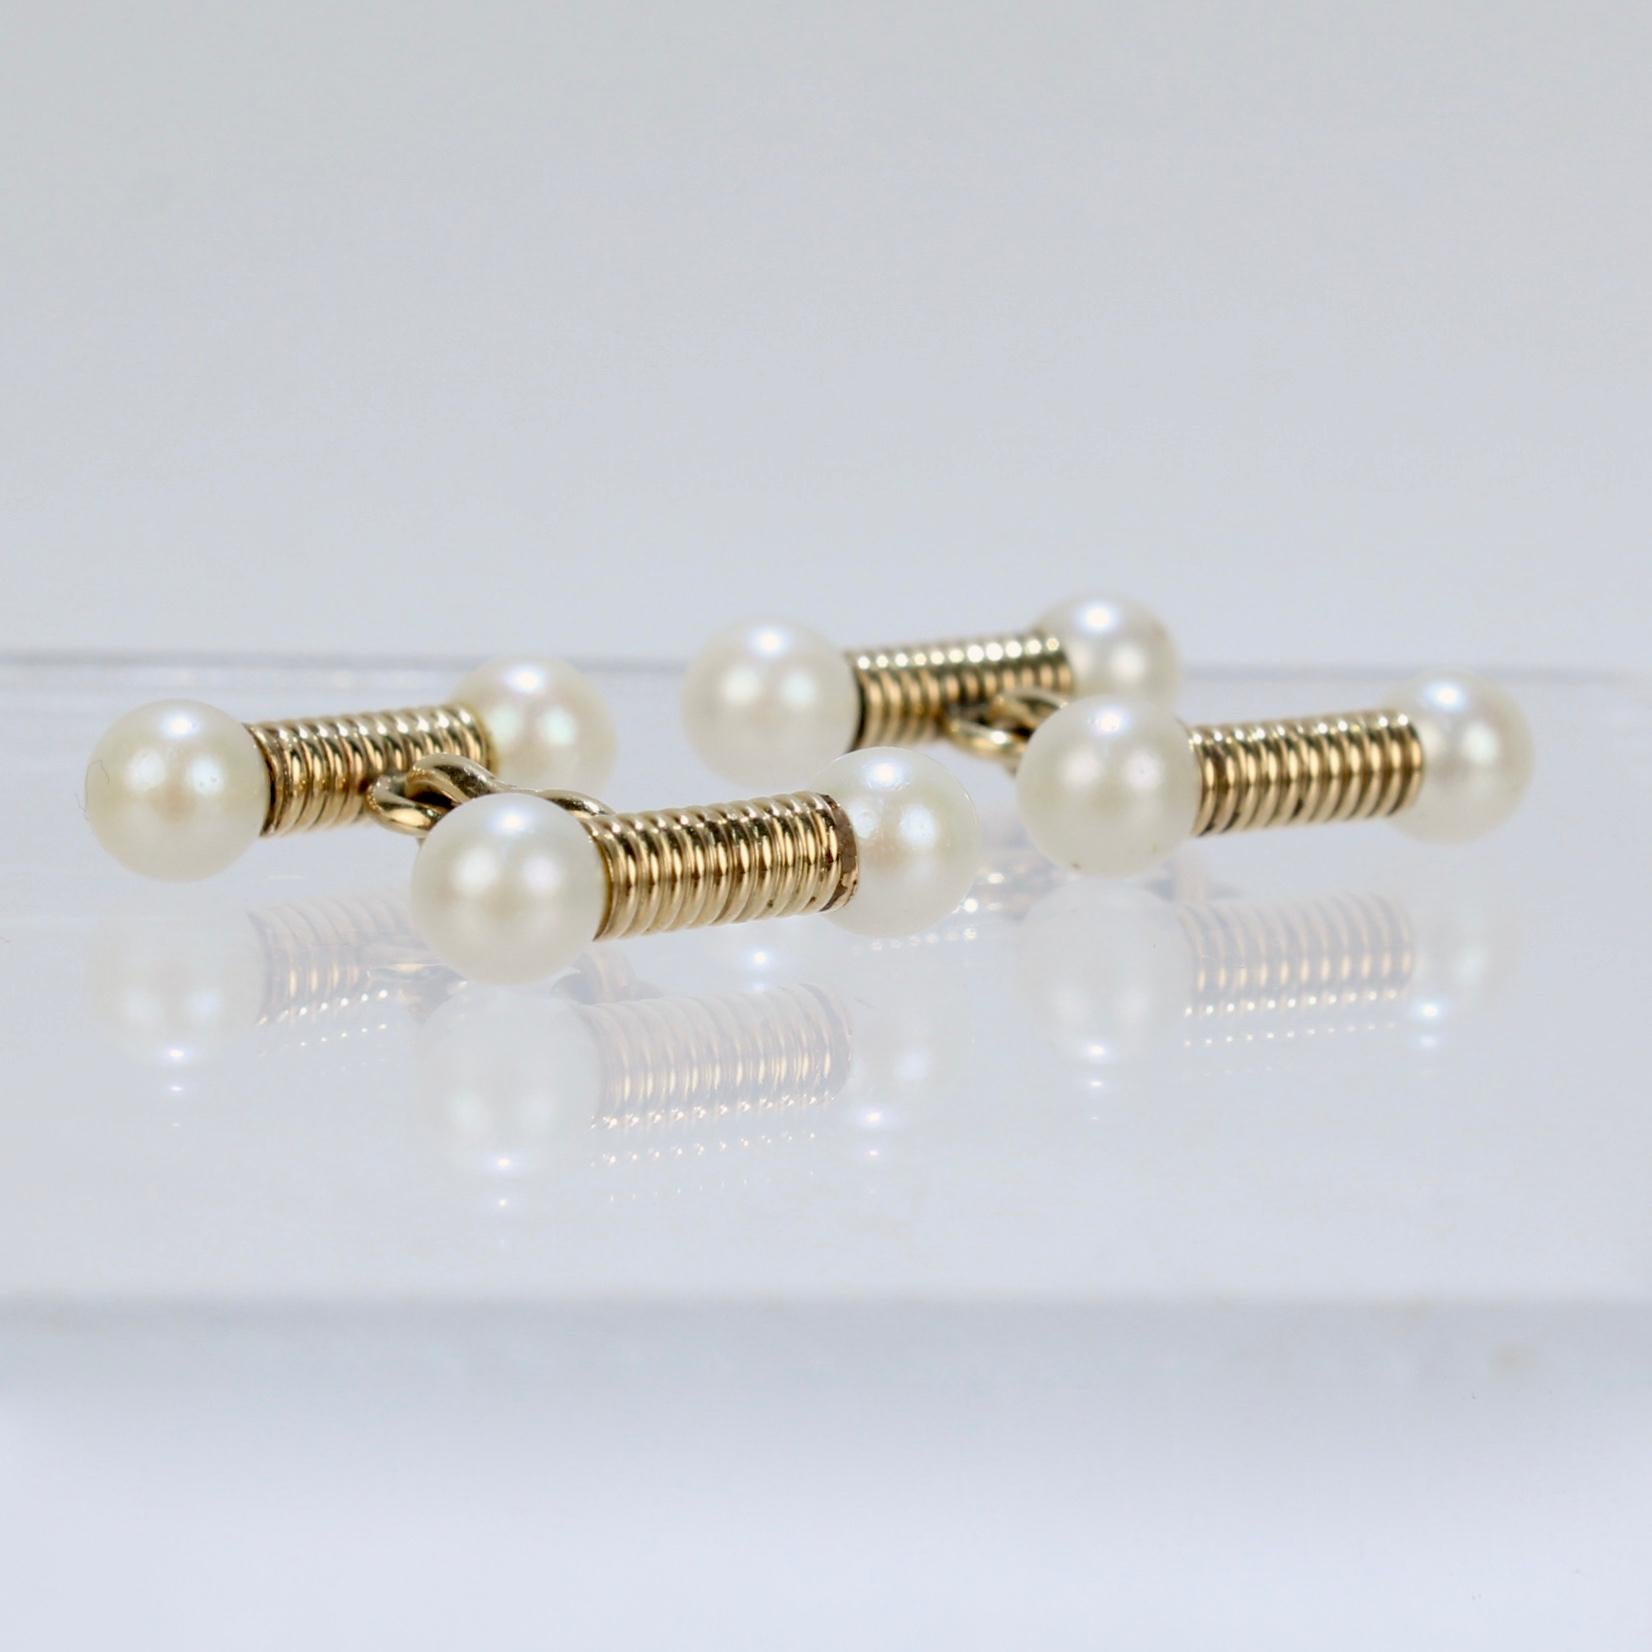 A fine pair of Edwardian gold & pearl cufflinks.

In 14k yellow gold. 

Each comprised of 2 spiral shaft heads terminating in round white pearls joined with a shaped link.

Simply top-shelf cufflinks!

Date:
20th Century

Overall Condition:
It is in